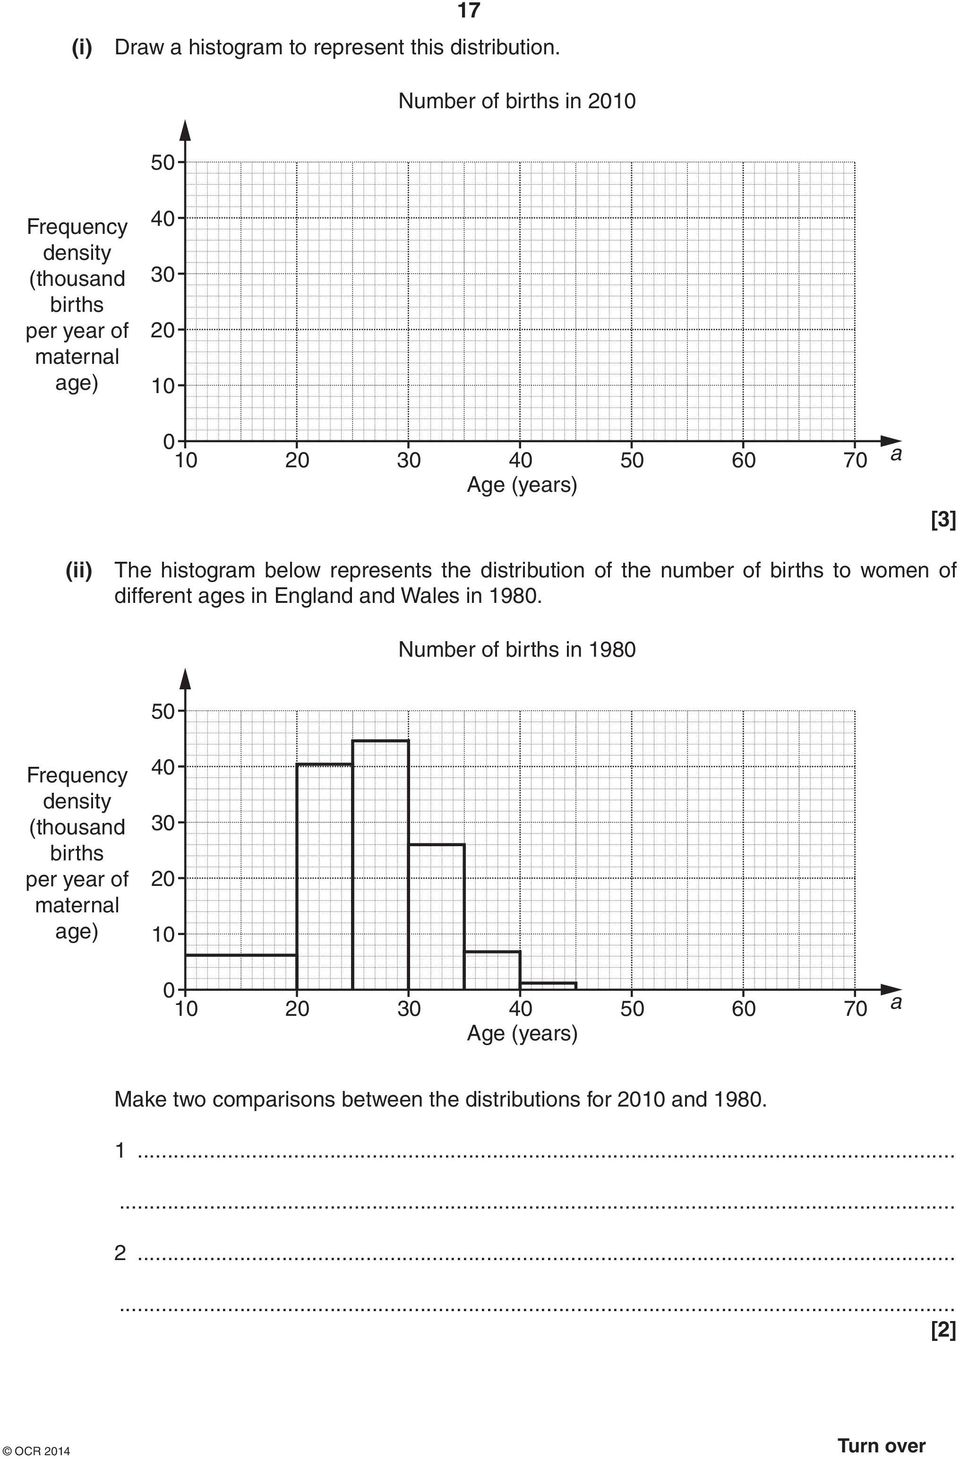 (ii) The histogram below represents the distribution of the number of births to women of different ages in England and Wales in 1980.